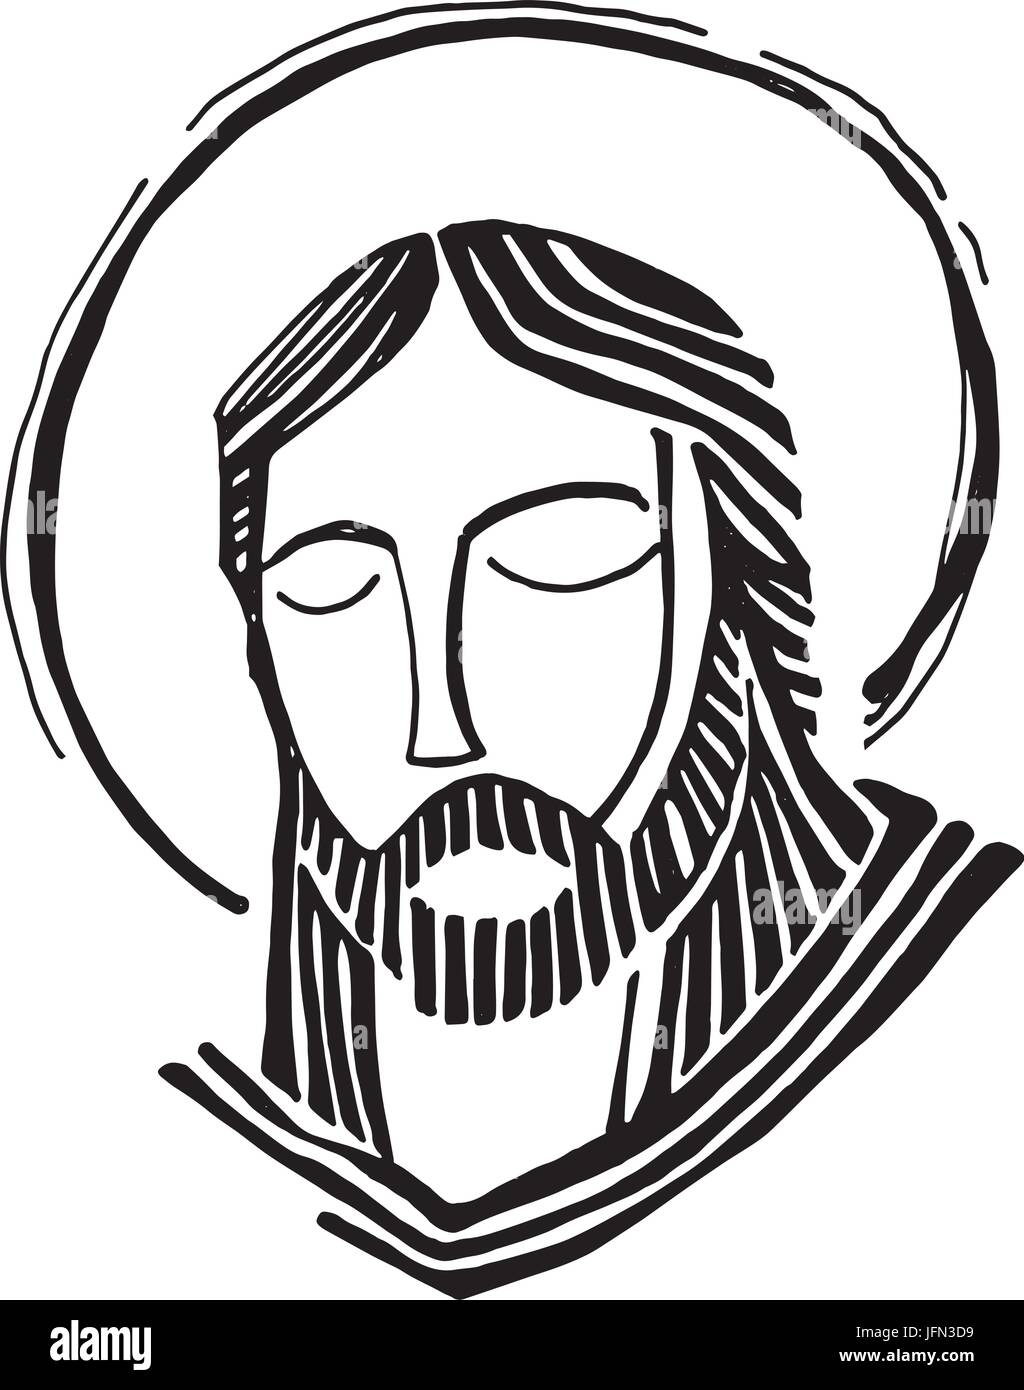 Hand drawn vector illustration or drawing of Jesus Christ Face ...